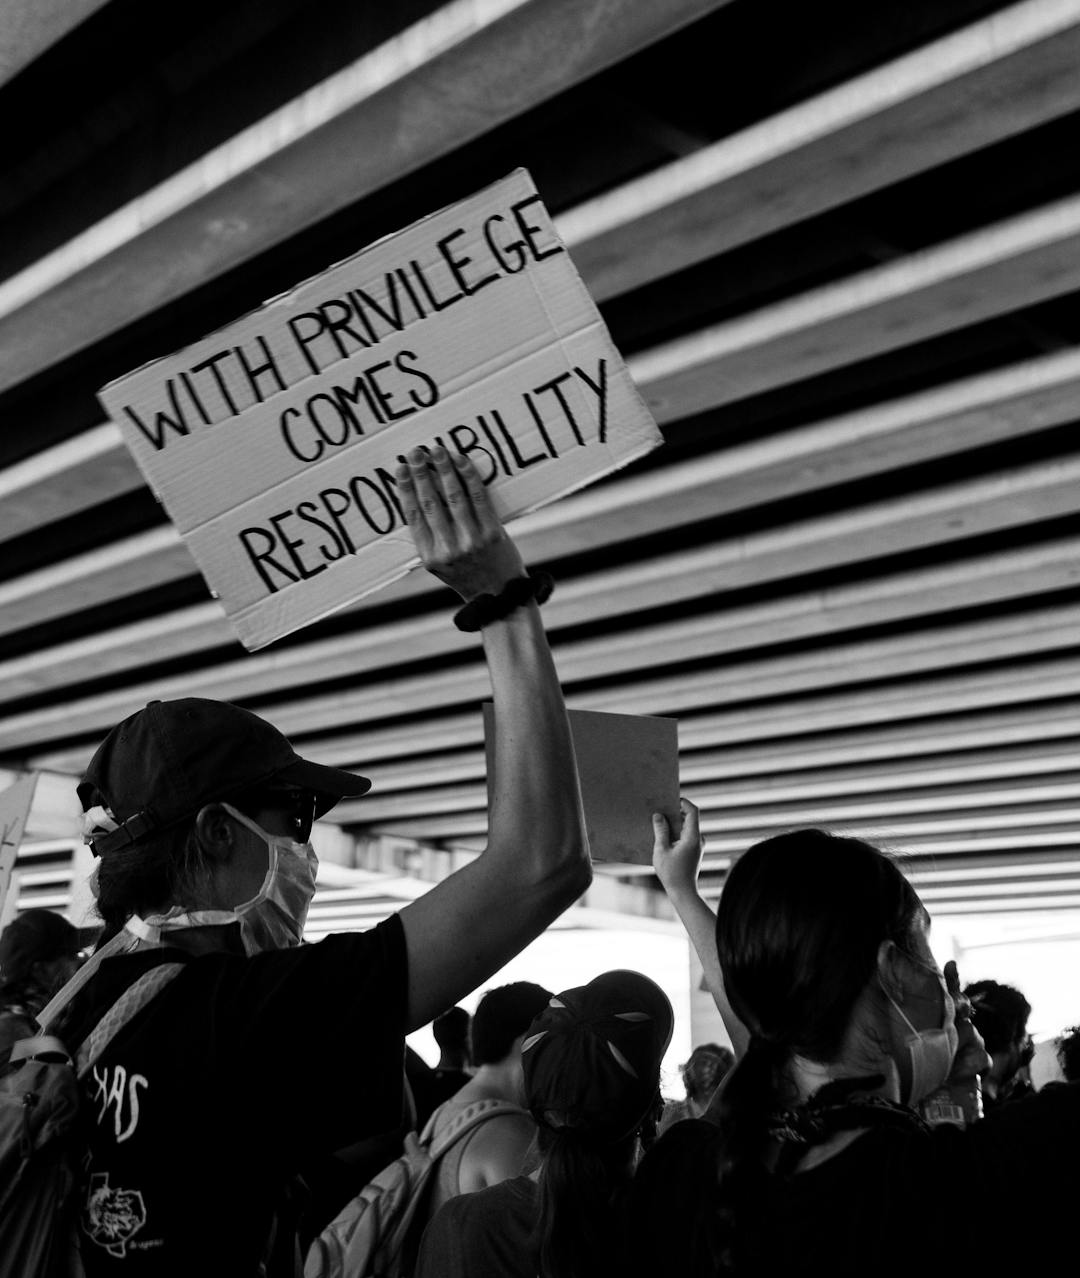 A person holds a sign reading "WITH PRIVILEGE COMES RESPONSIBILITY" during a protest under a bridge, surrounded by a crowd of people wearing masks and caps.